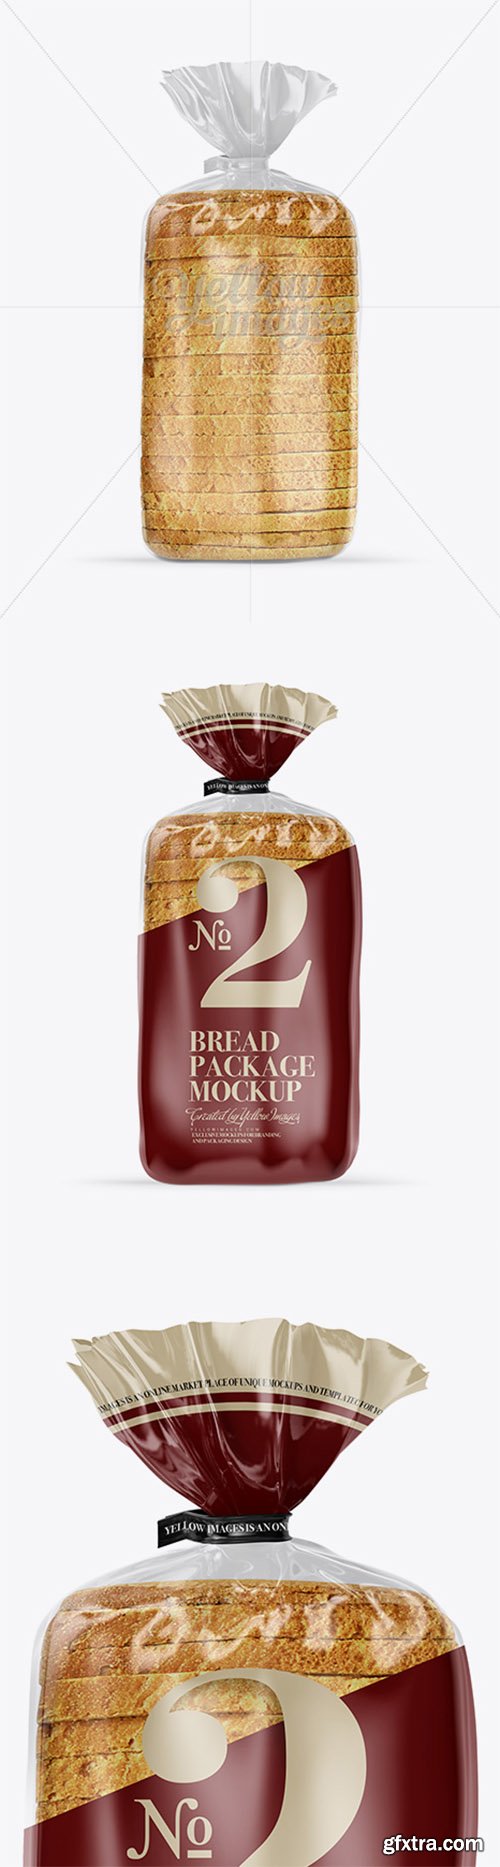 Bread Package With Clip Mockup 18306